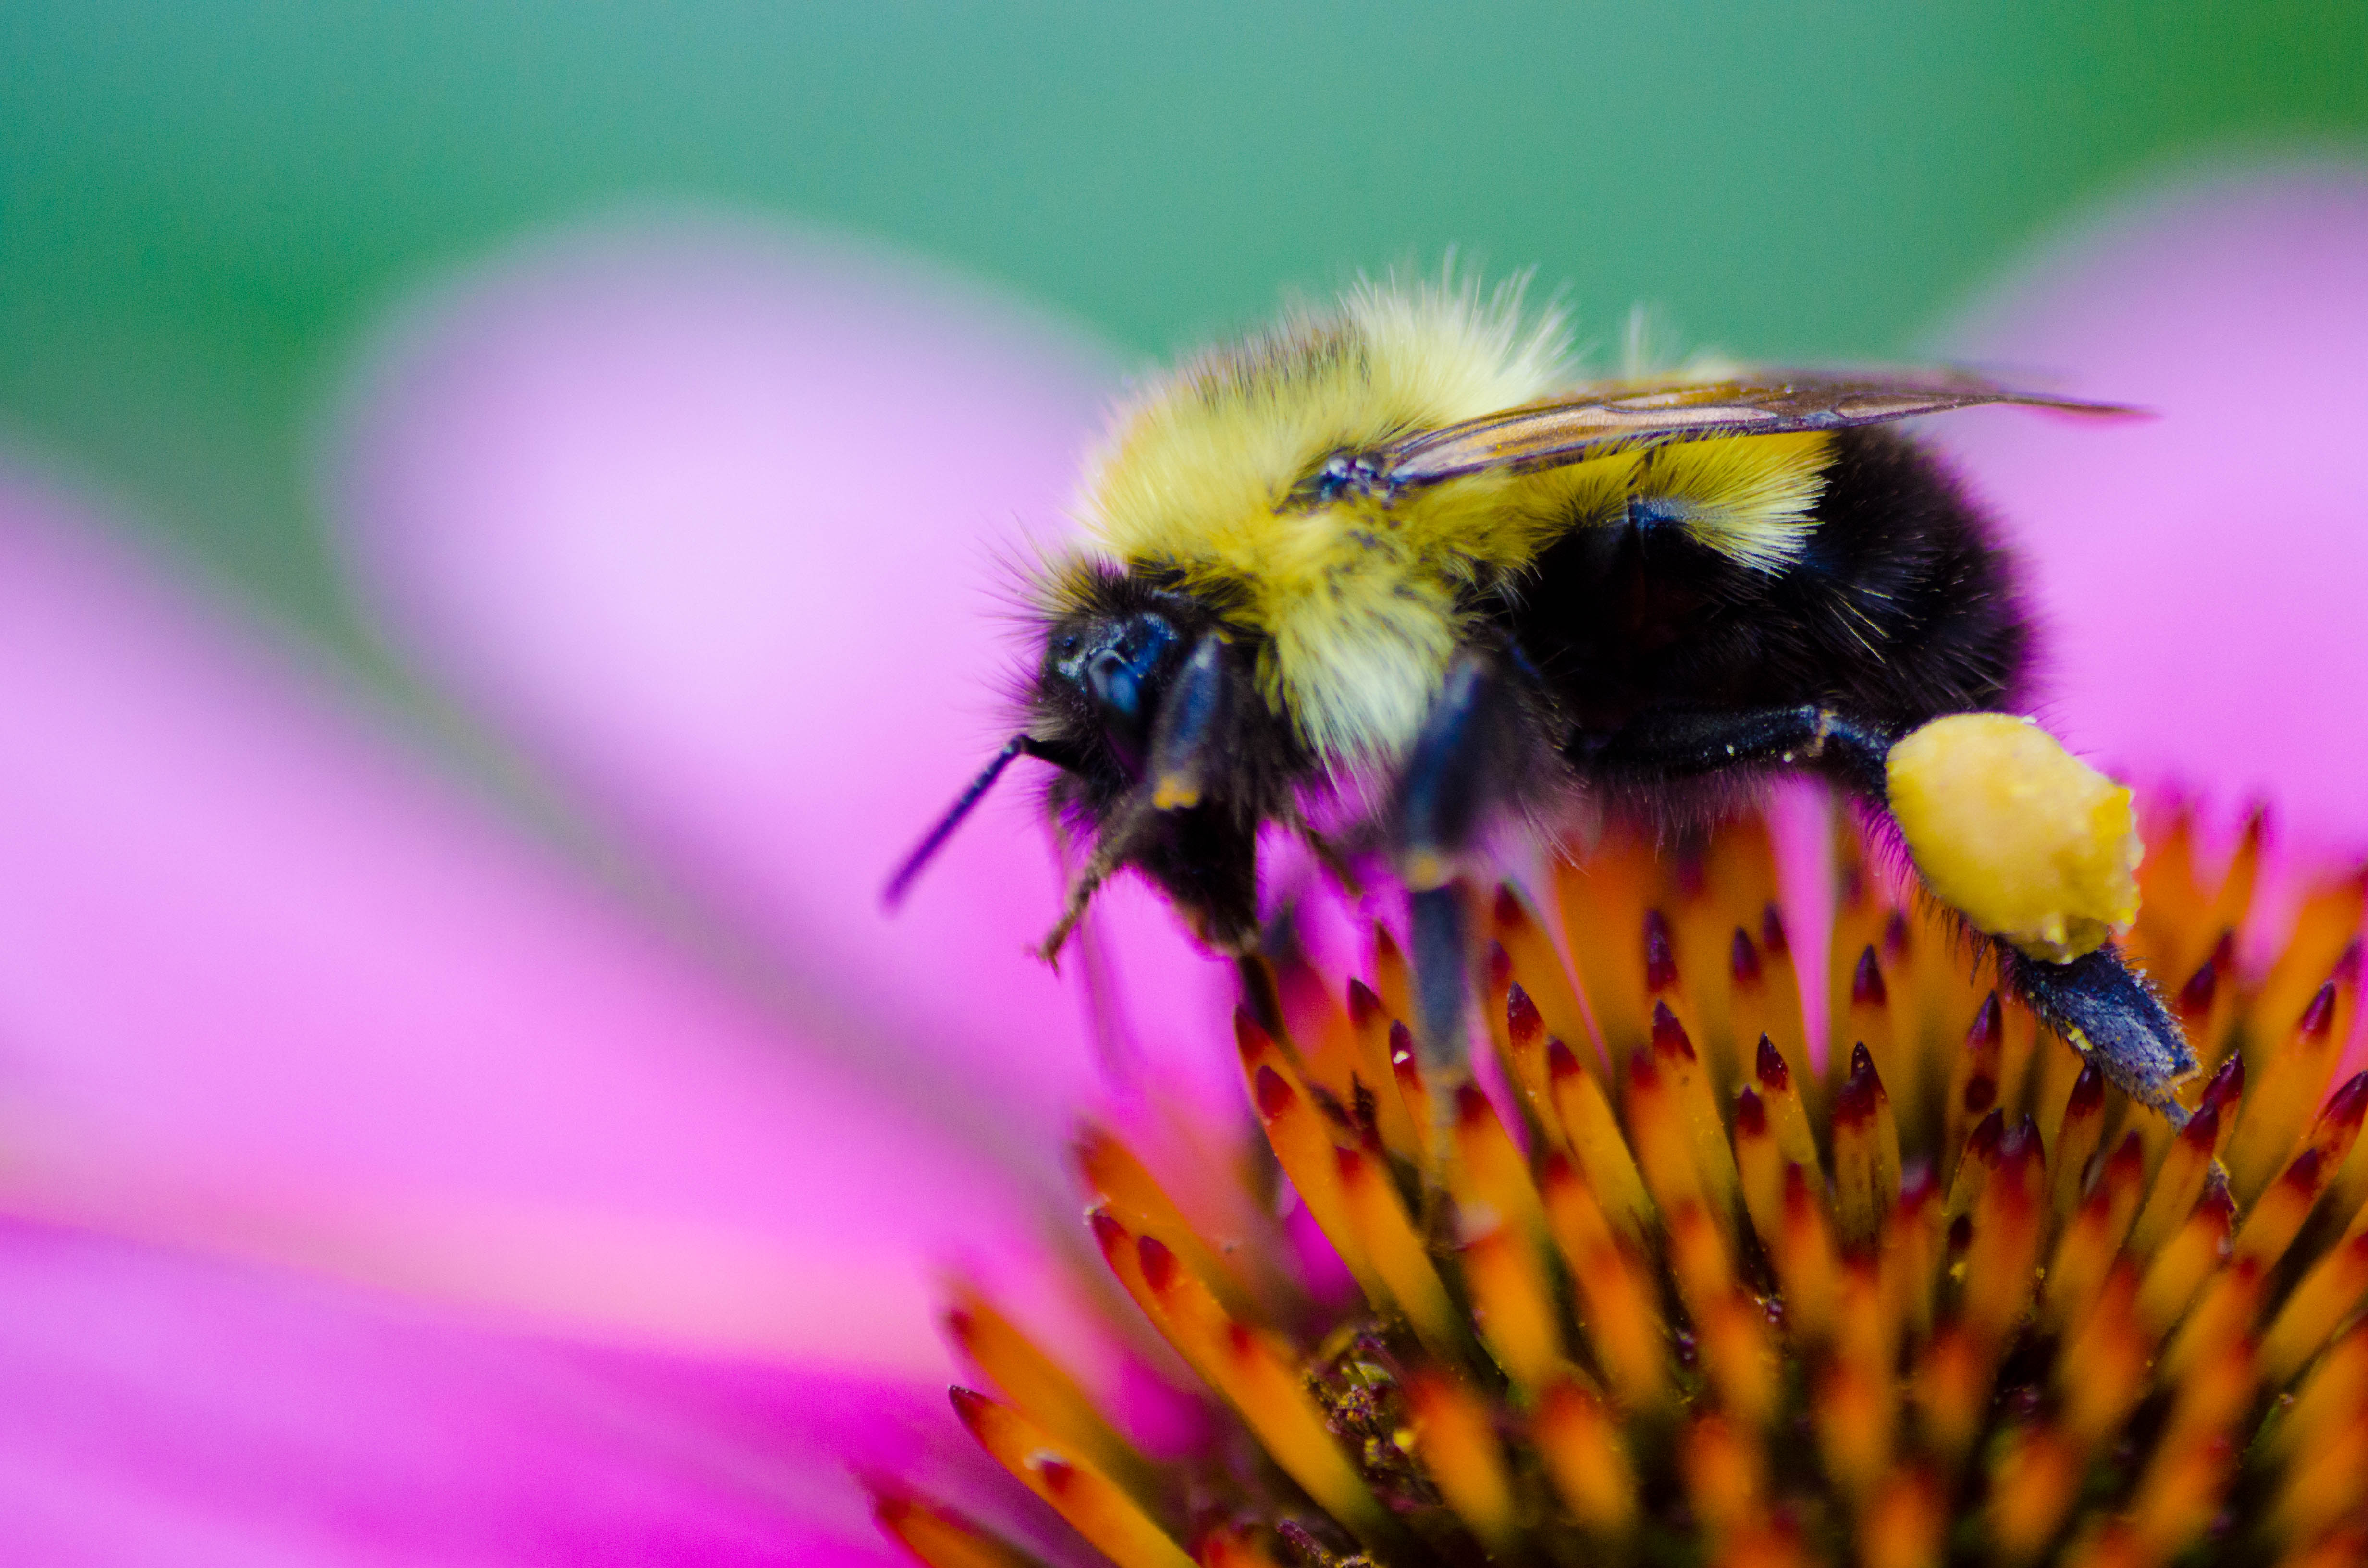 Beyond Pesticides Daily News Blog » Blog Archive Research Finds Bees ...